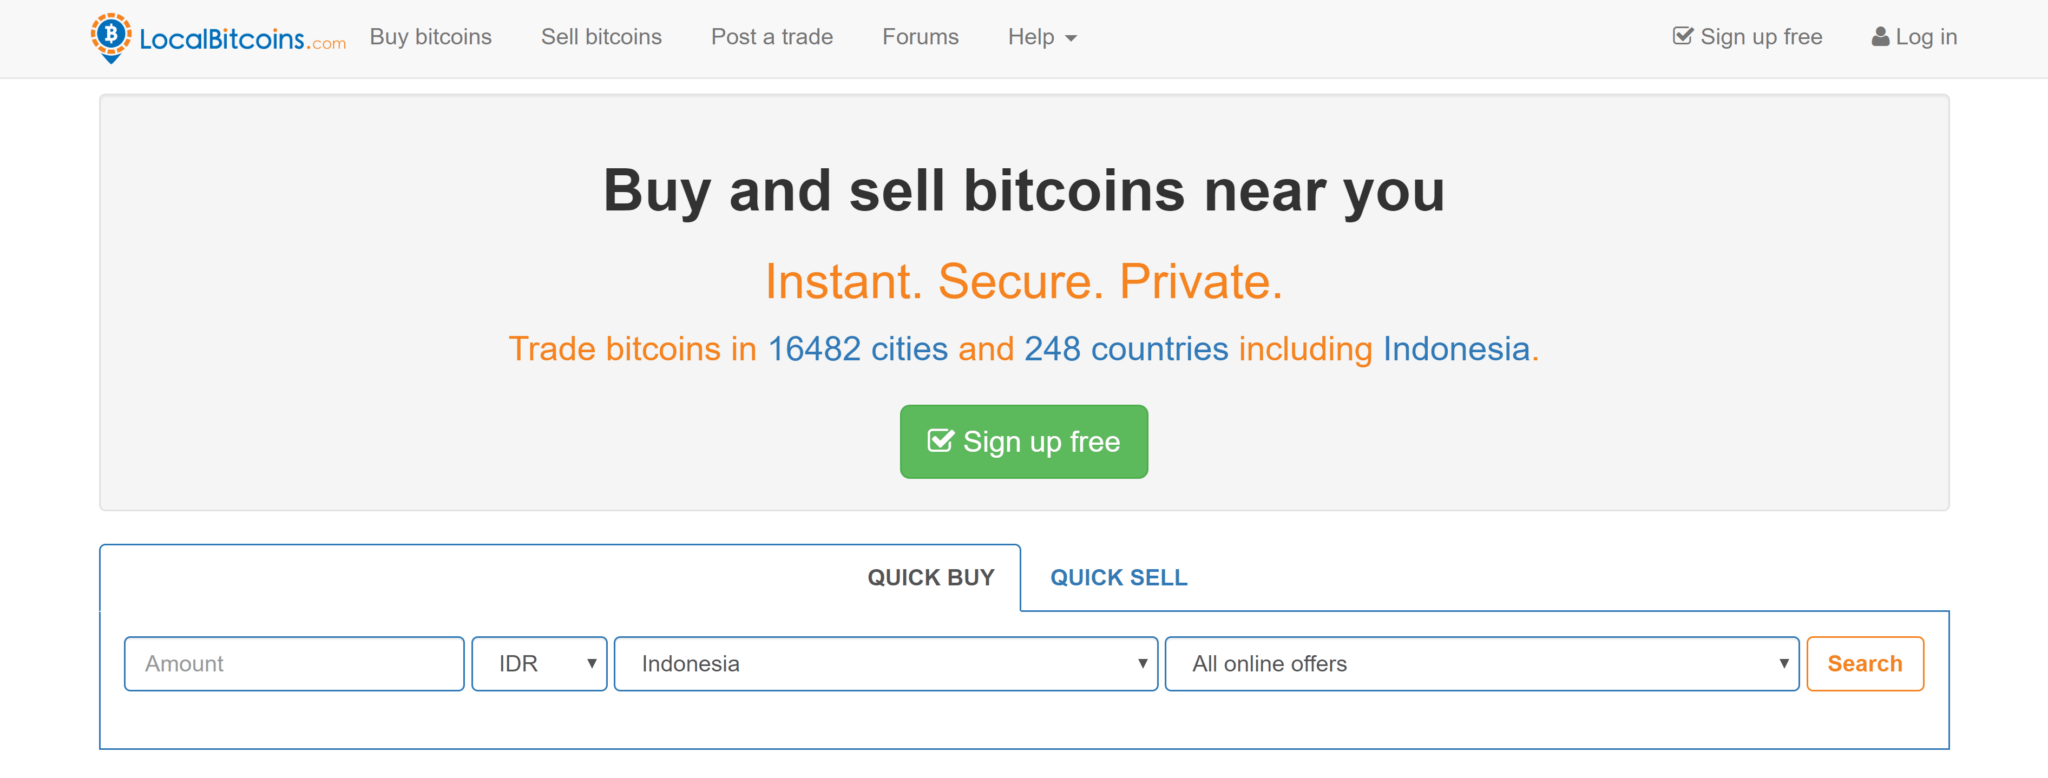 How to Buy bitcoin with cash: A screencap from the homepage of LocalBitcoins